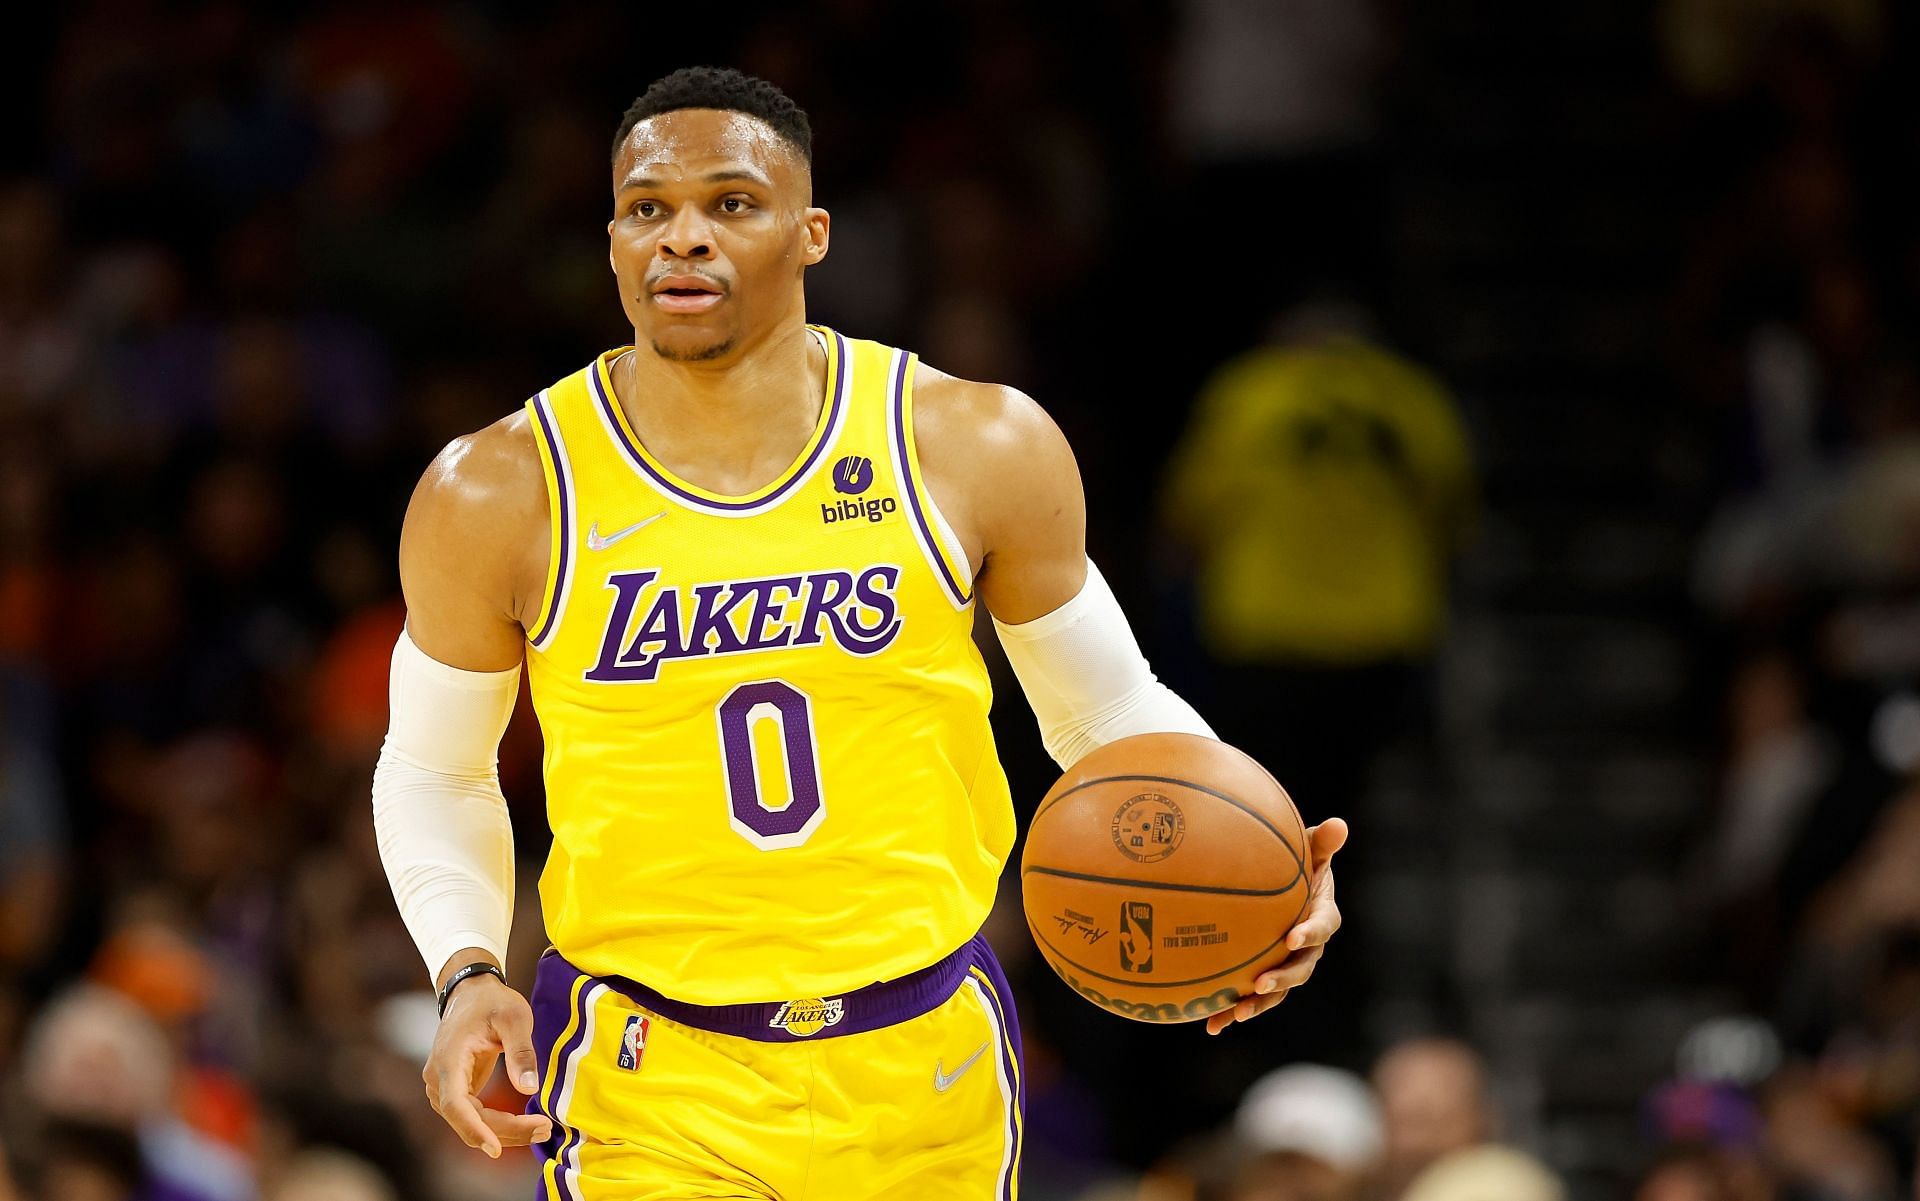 Russell Westbrook of the LA Lakers during the 2021-22 NBA season